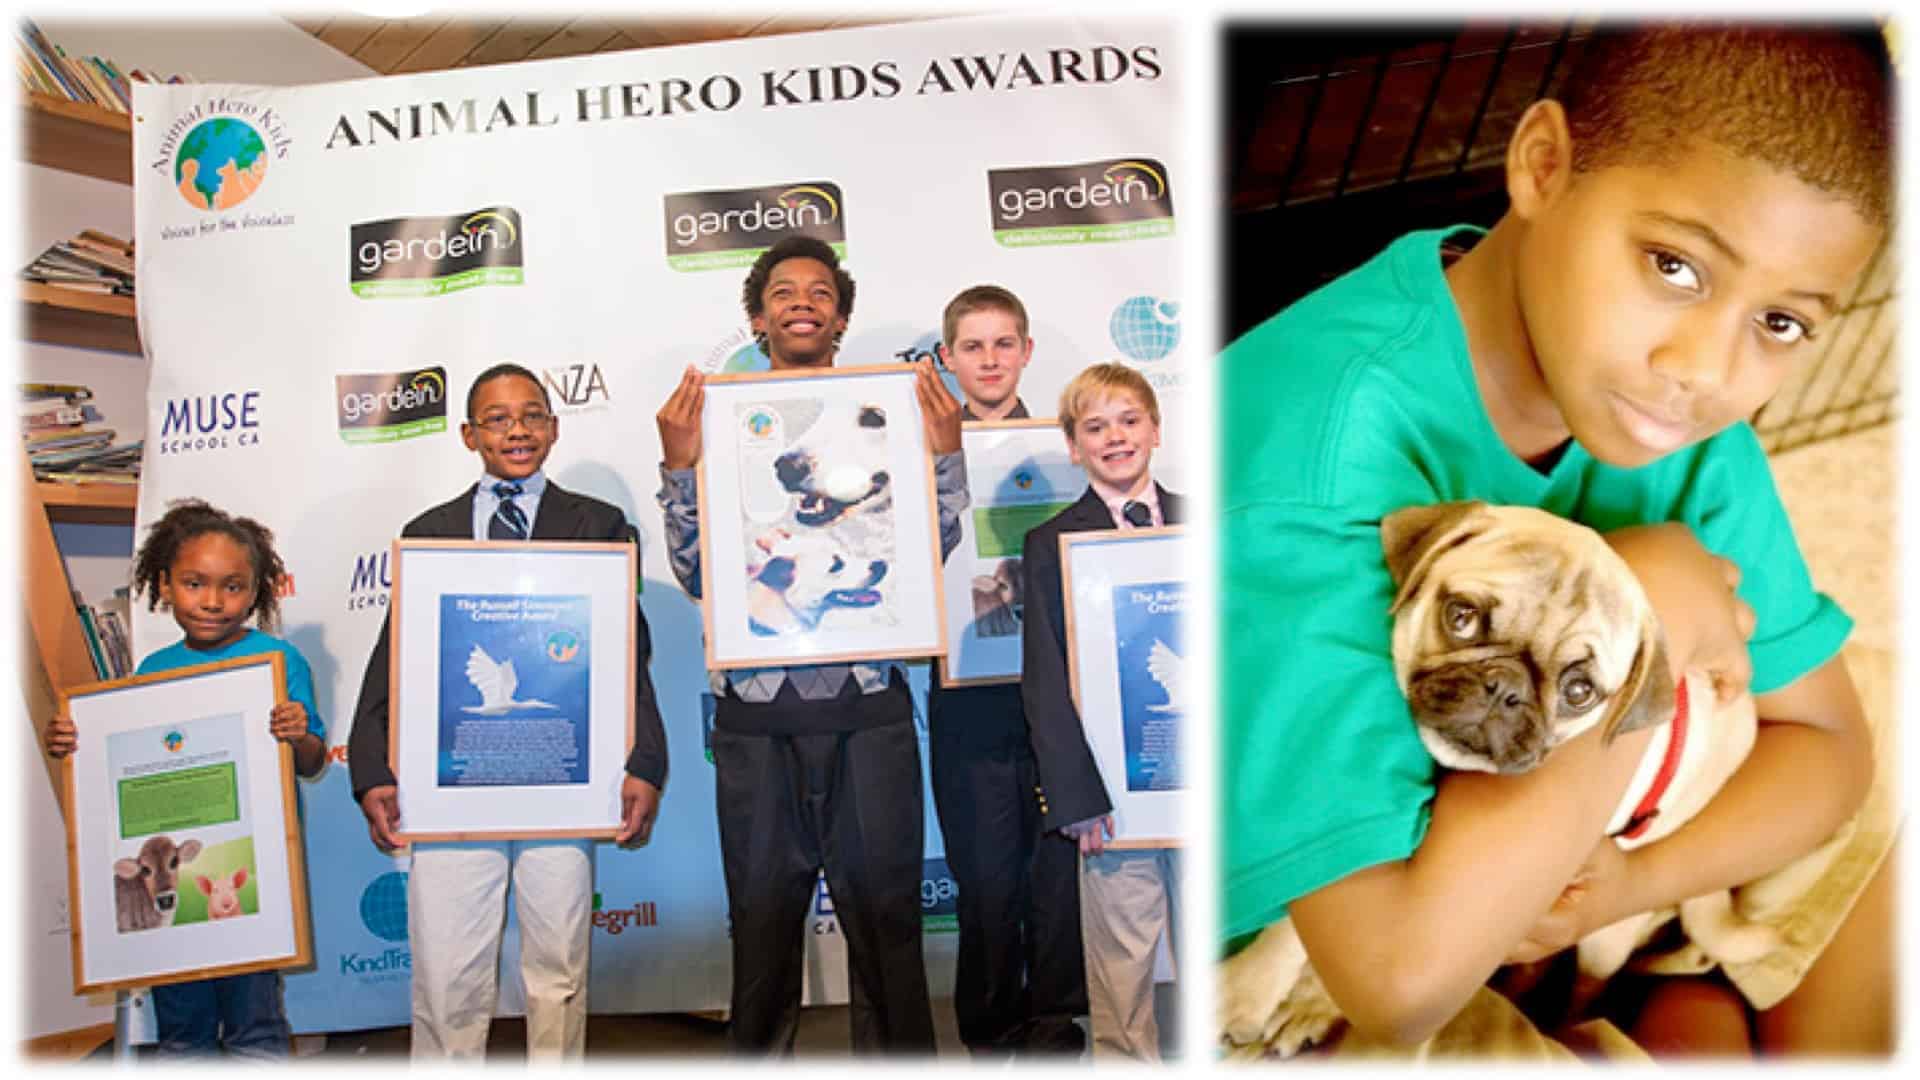 The image is split in two. On the left five winners of the “Animal Hero Kids” are shown on stage holding their certificates. On the right is a close-up of one of the winners cradling a pug dog to their chest.